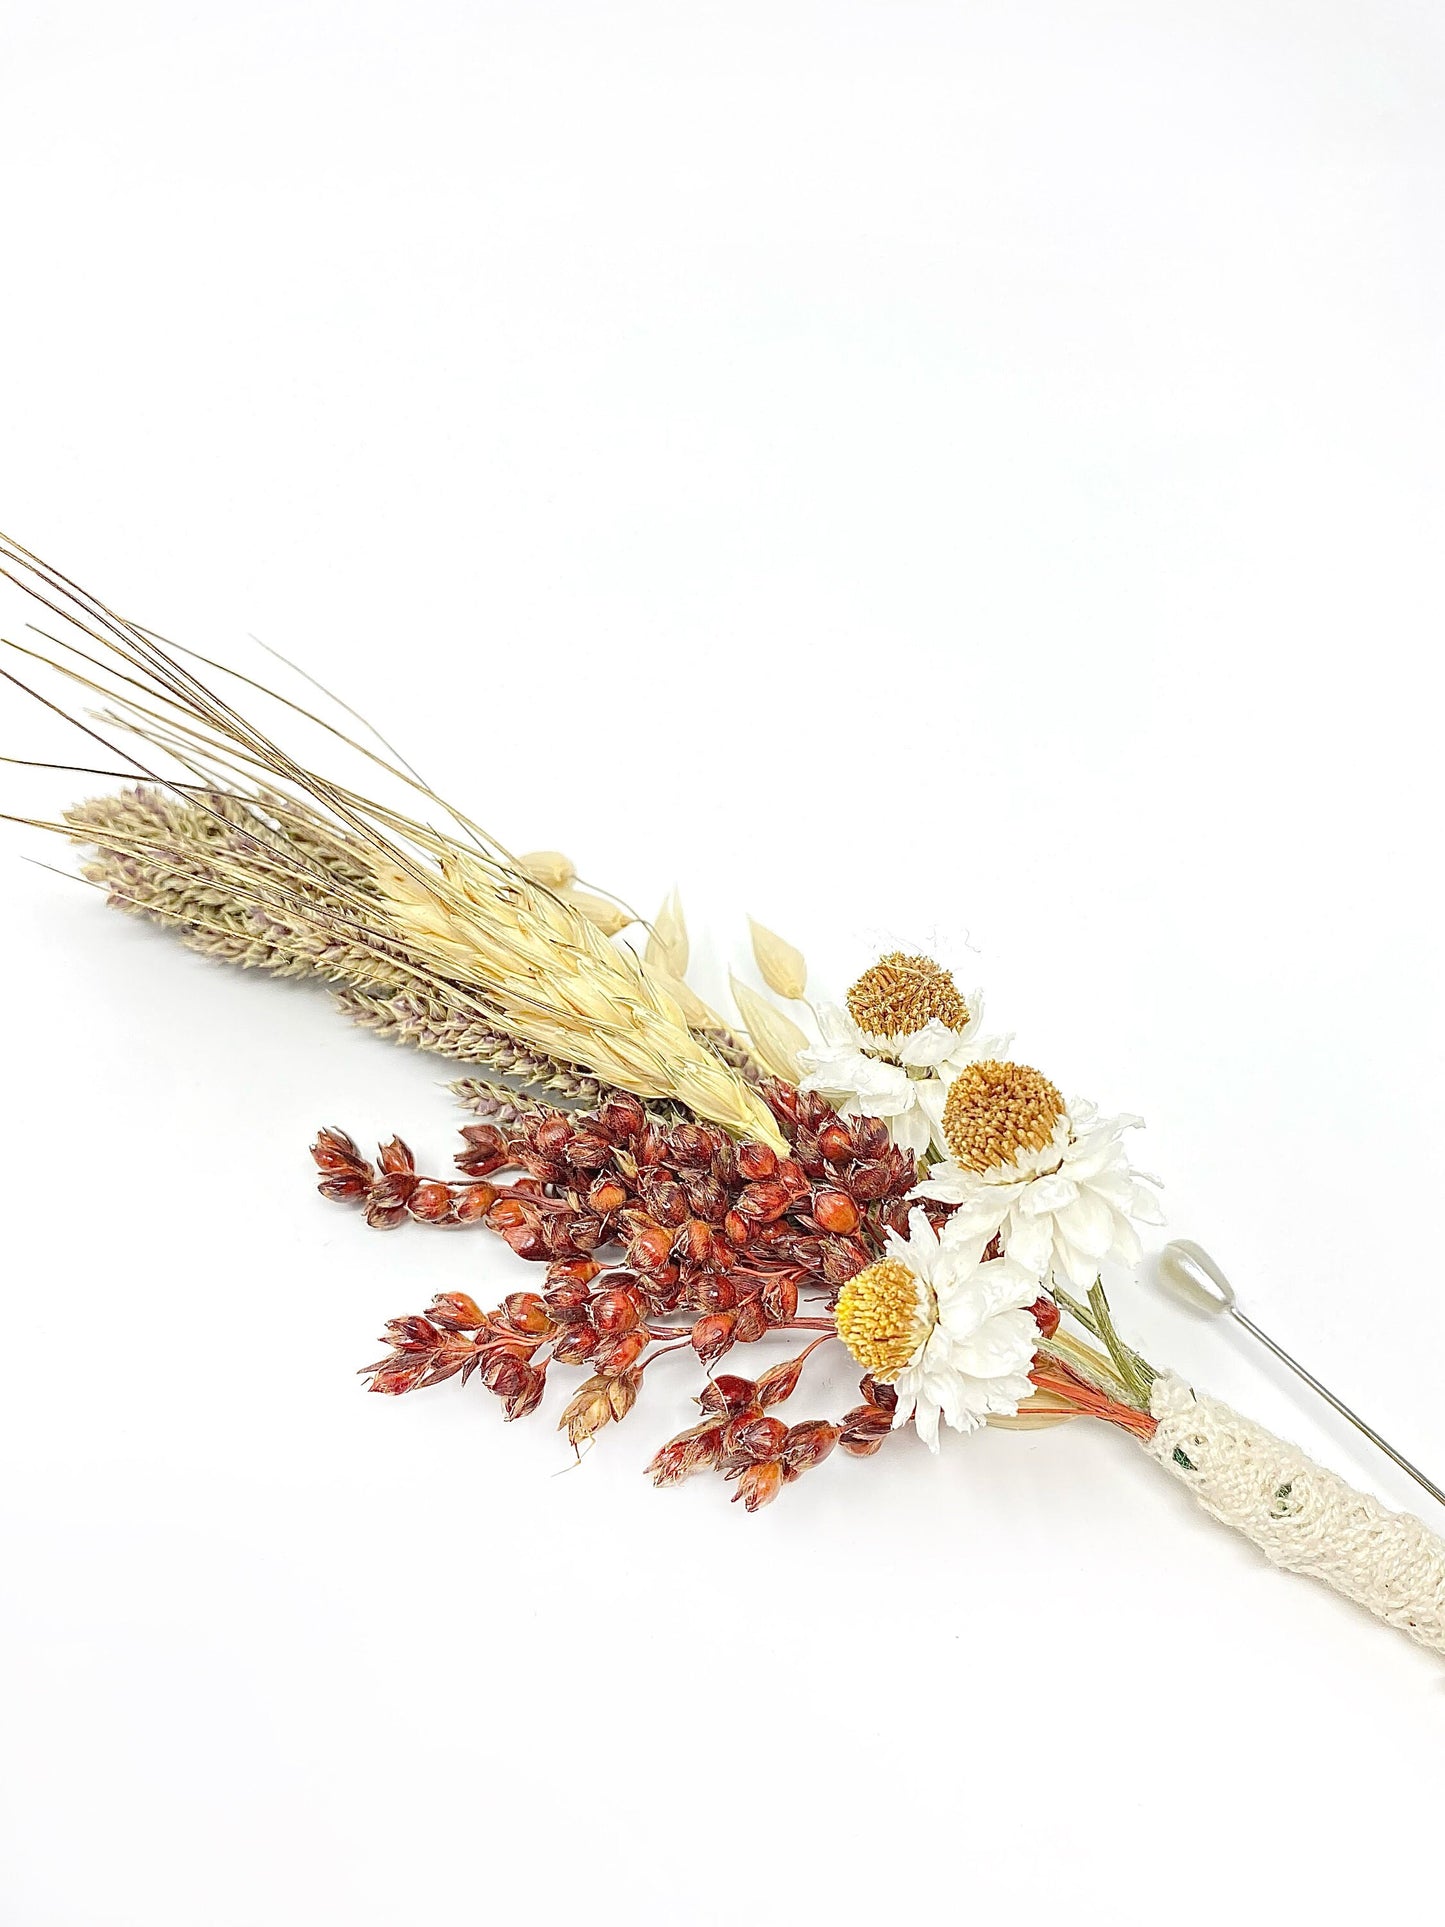 Wedding Boutonniere, Preserved Flowers, Dried Floral, Bridal Accessories, Ammobium, Broom Corn, Beige and Red